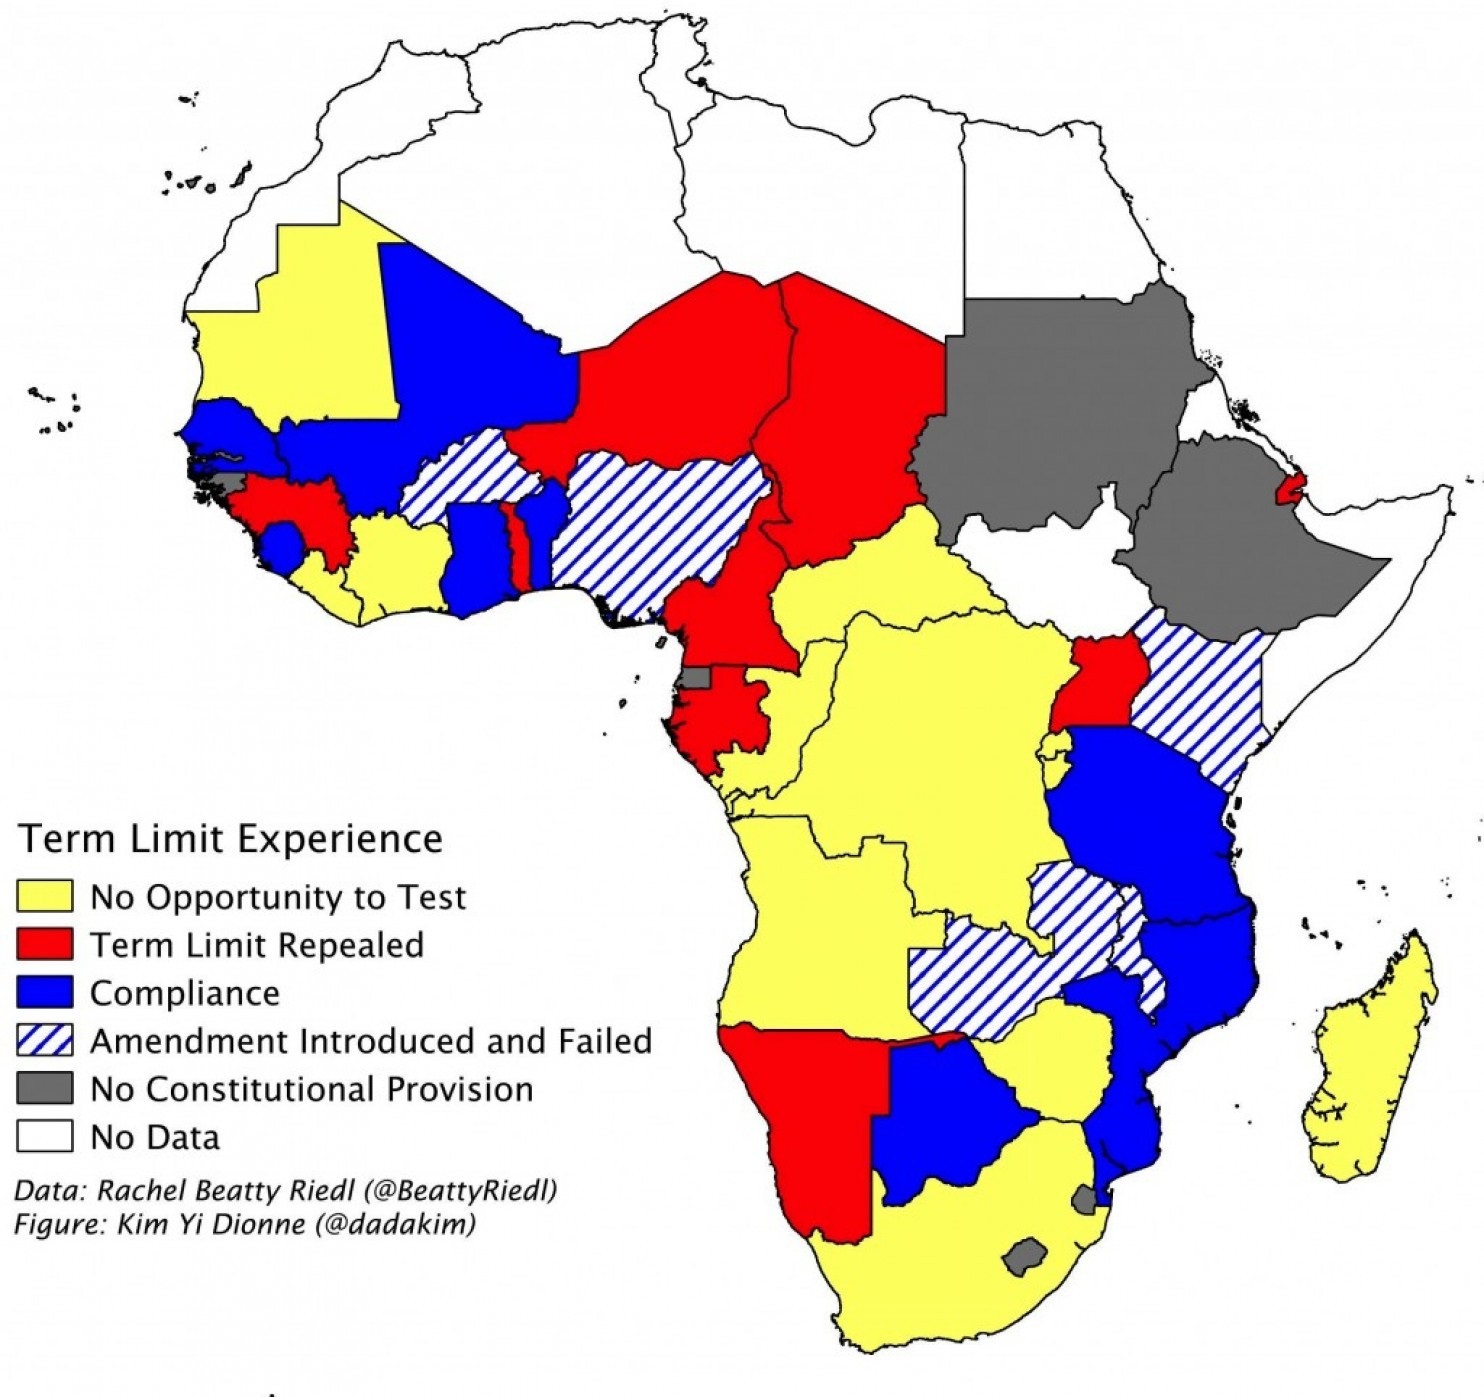 African countries are shaded according to their experience as of February 2015 regarding attempts to repeal constitutional term limits of the executive. Data: Rachel Beatty Riedl. (Kim Yi Dionne/The Monkey Cage)